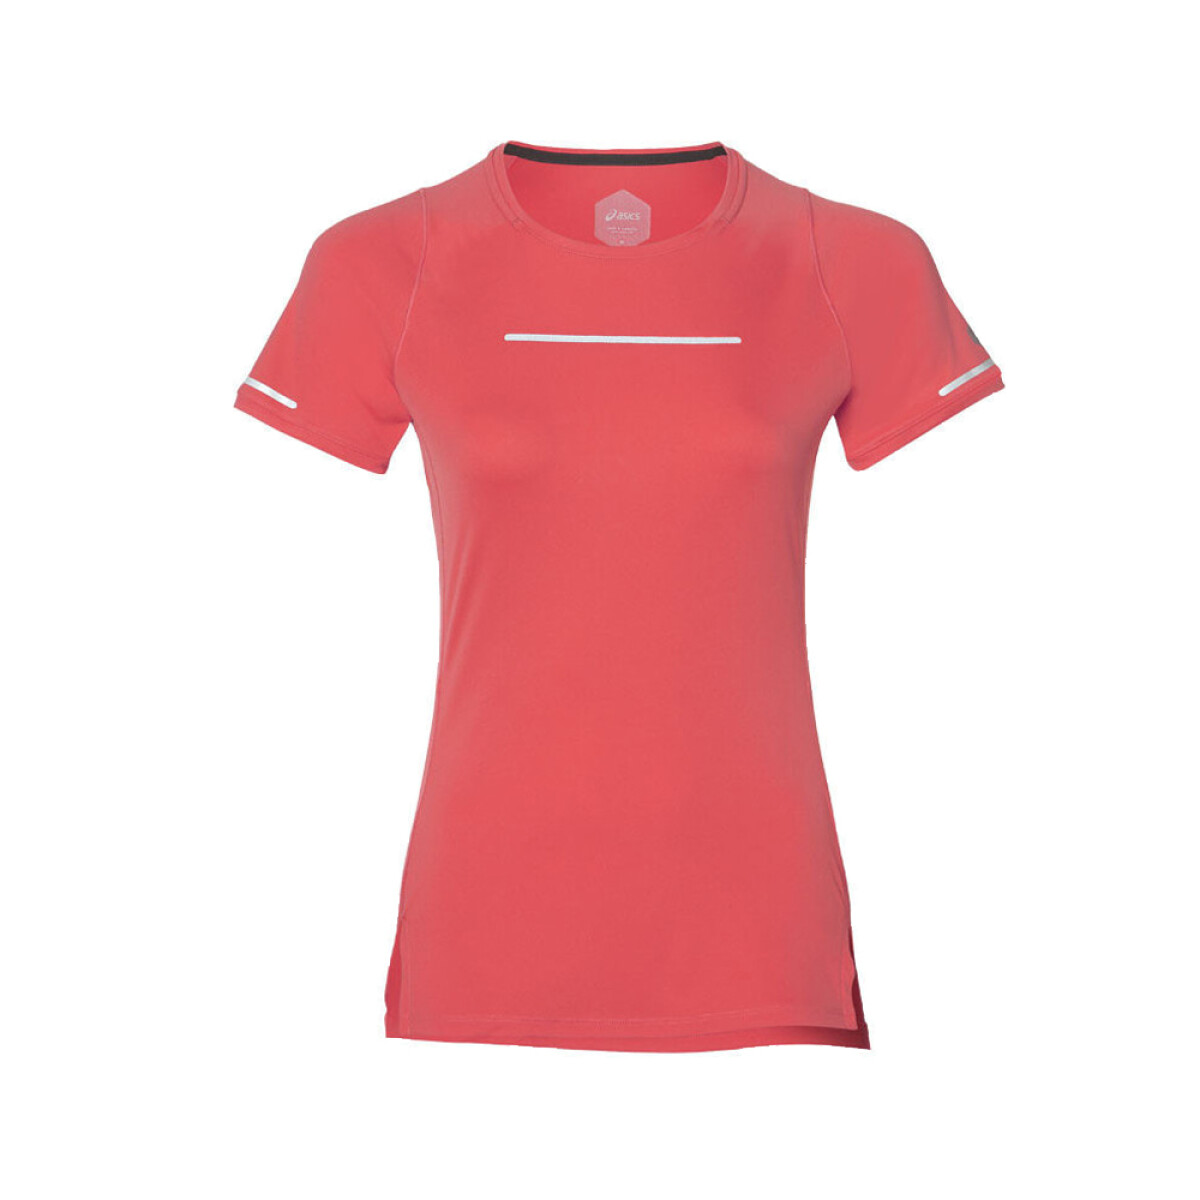 REMERA ASICS LITE-SHOW SS TOP - Coral 